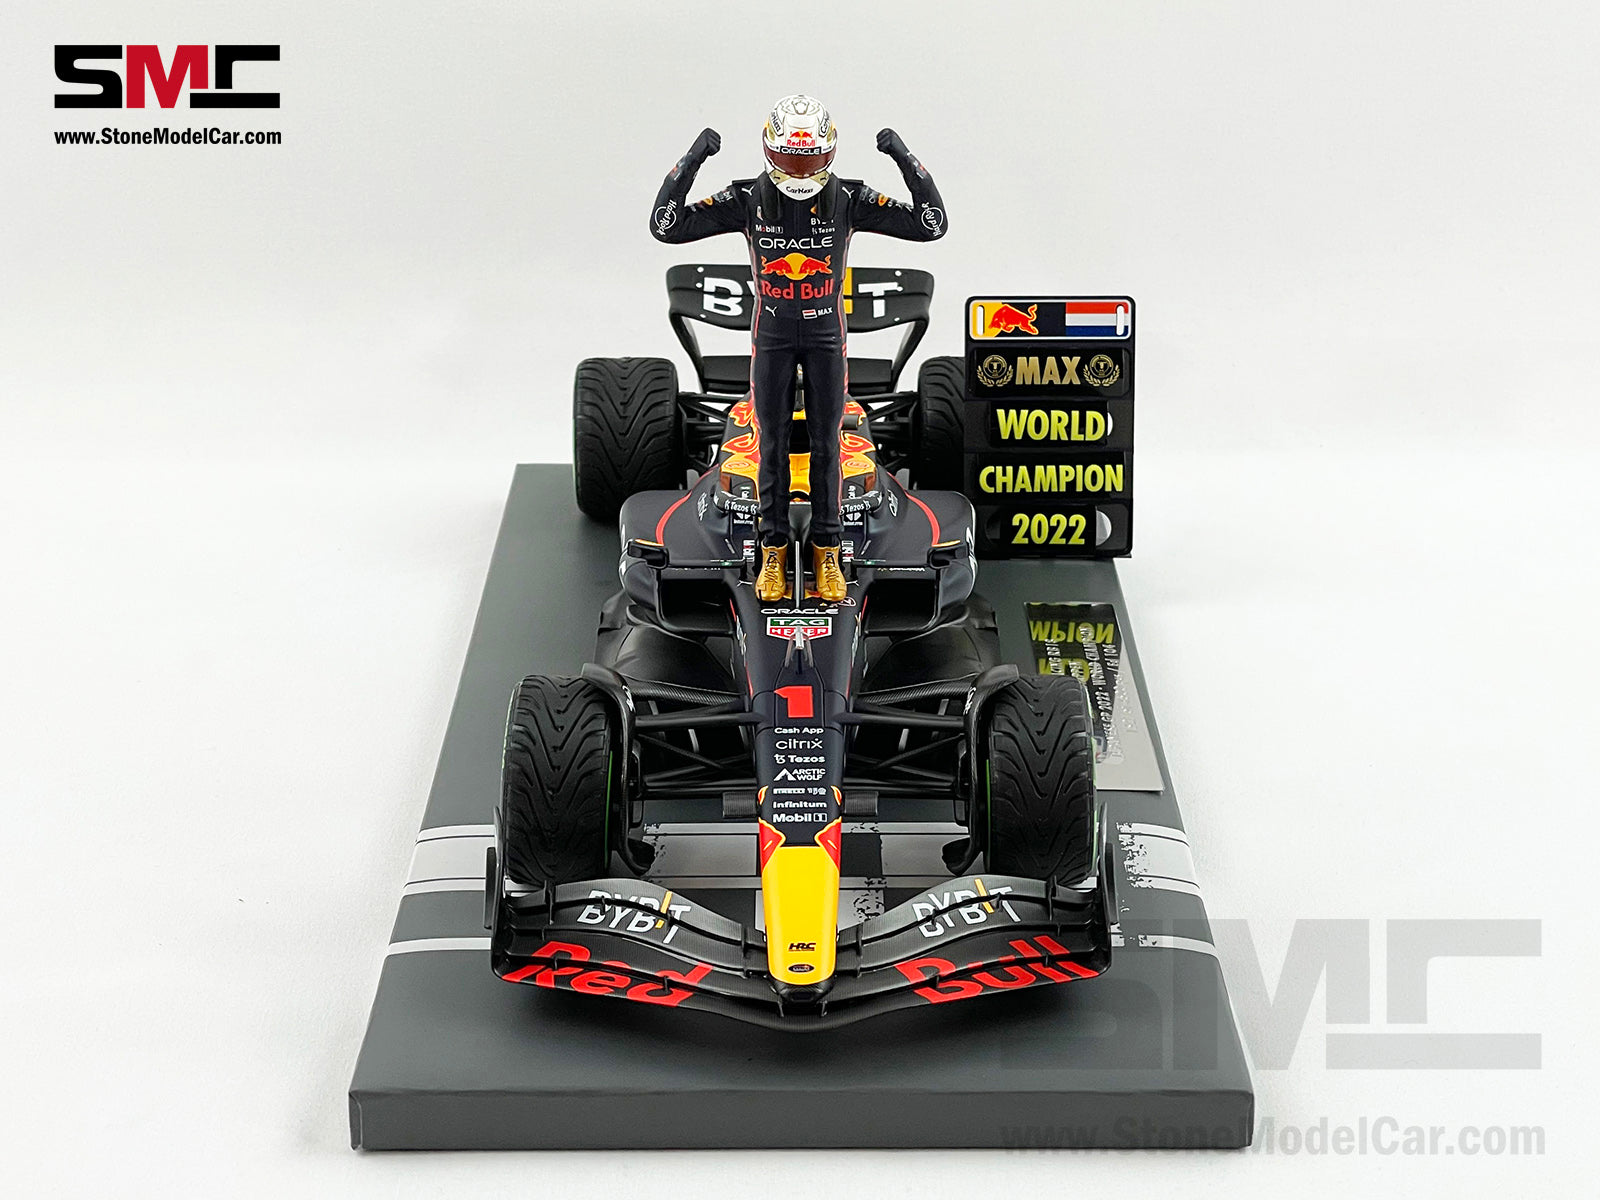 #1 Max Verstappen 2022 World Champion Red Bull F1 RB18 Japan GP 1:18  MINICHAMPS with Figure